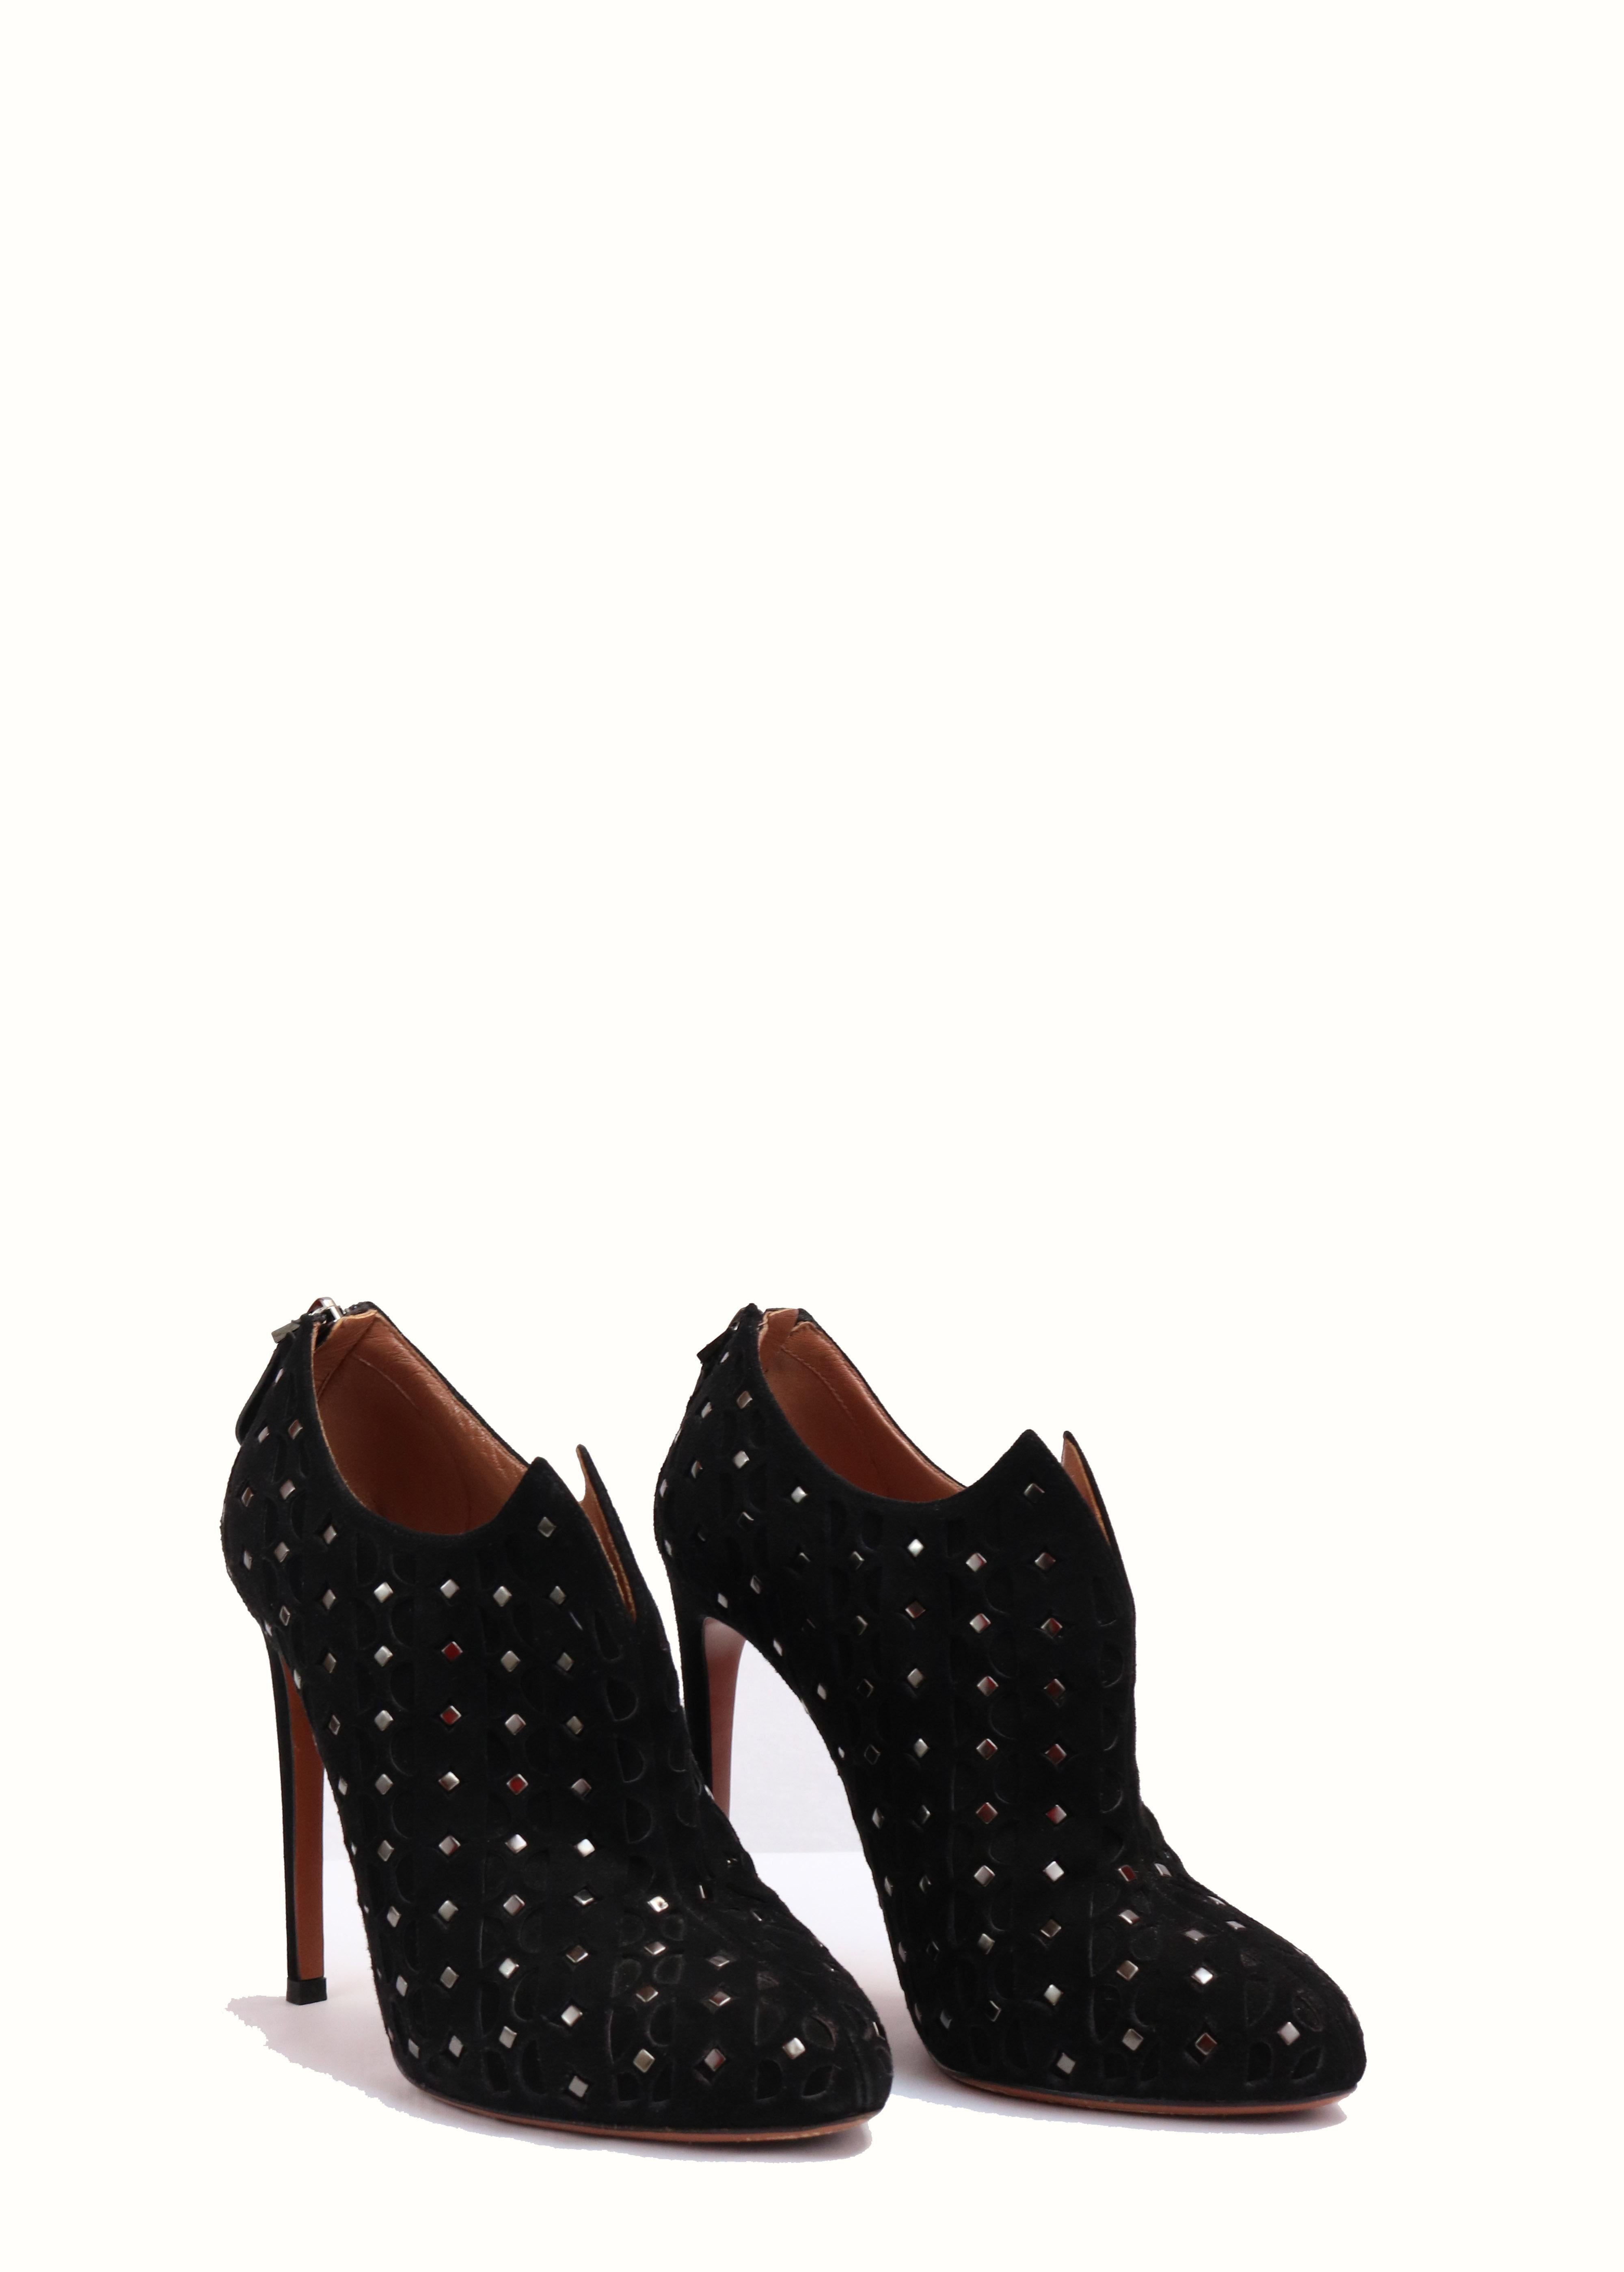 -Black suede booties with intricate studded and lacer cut design.
-Heel 4.5 -5